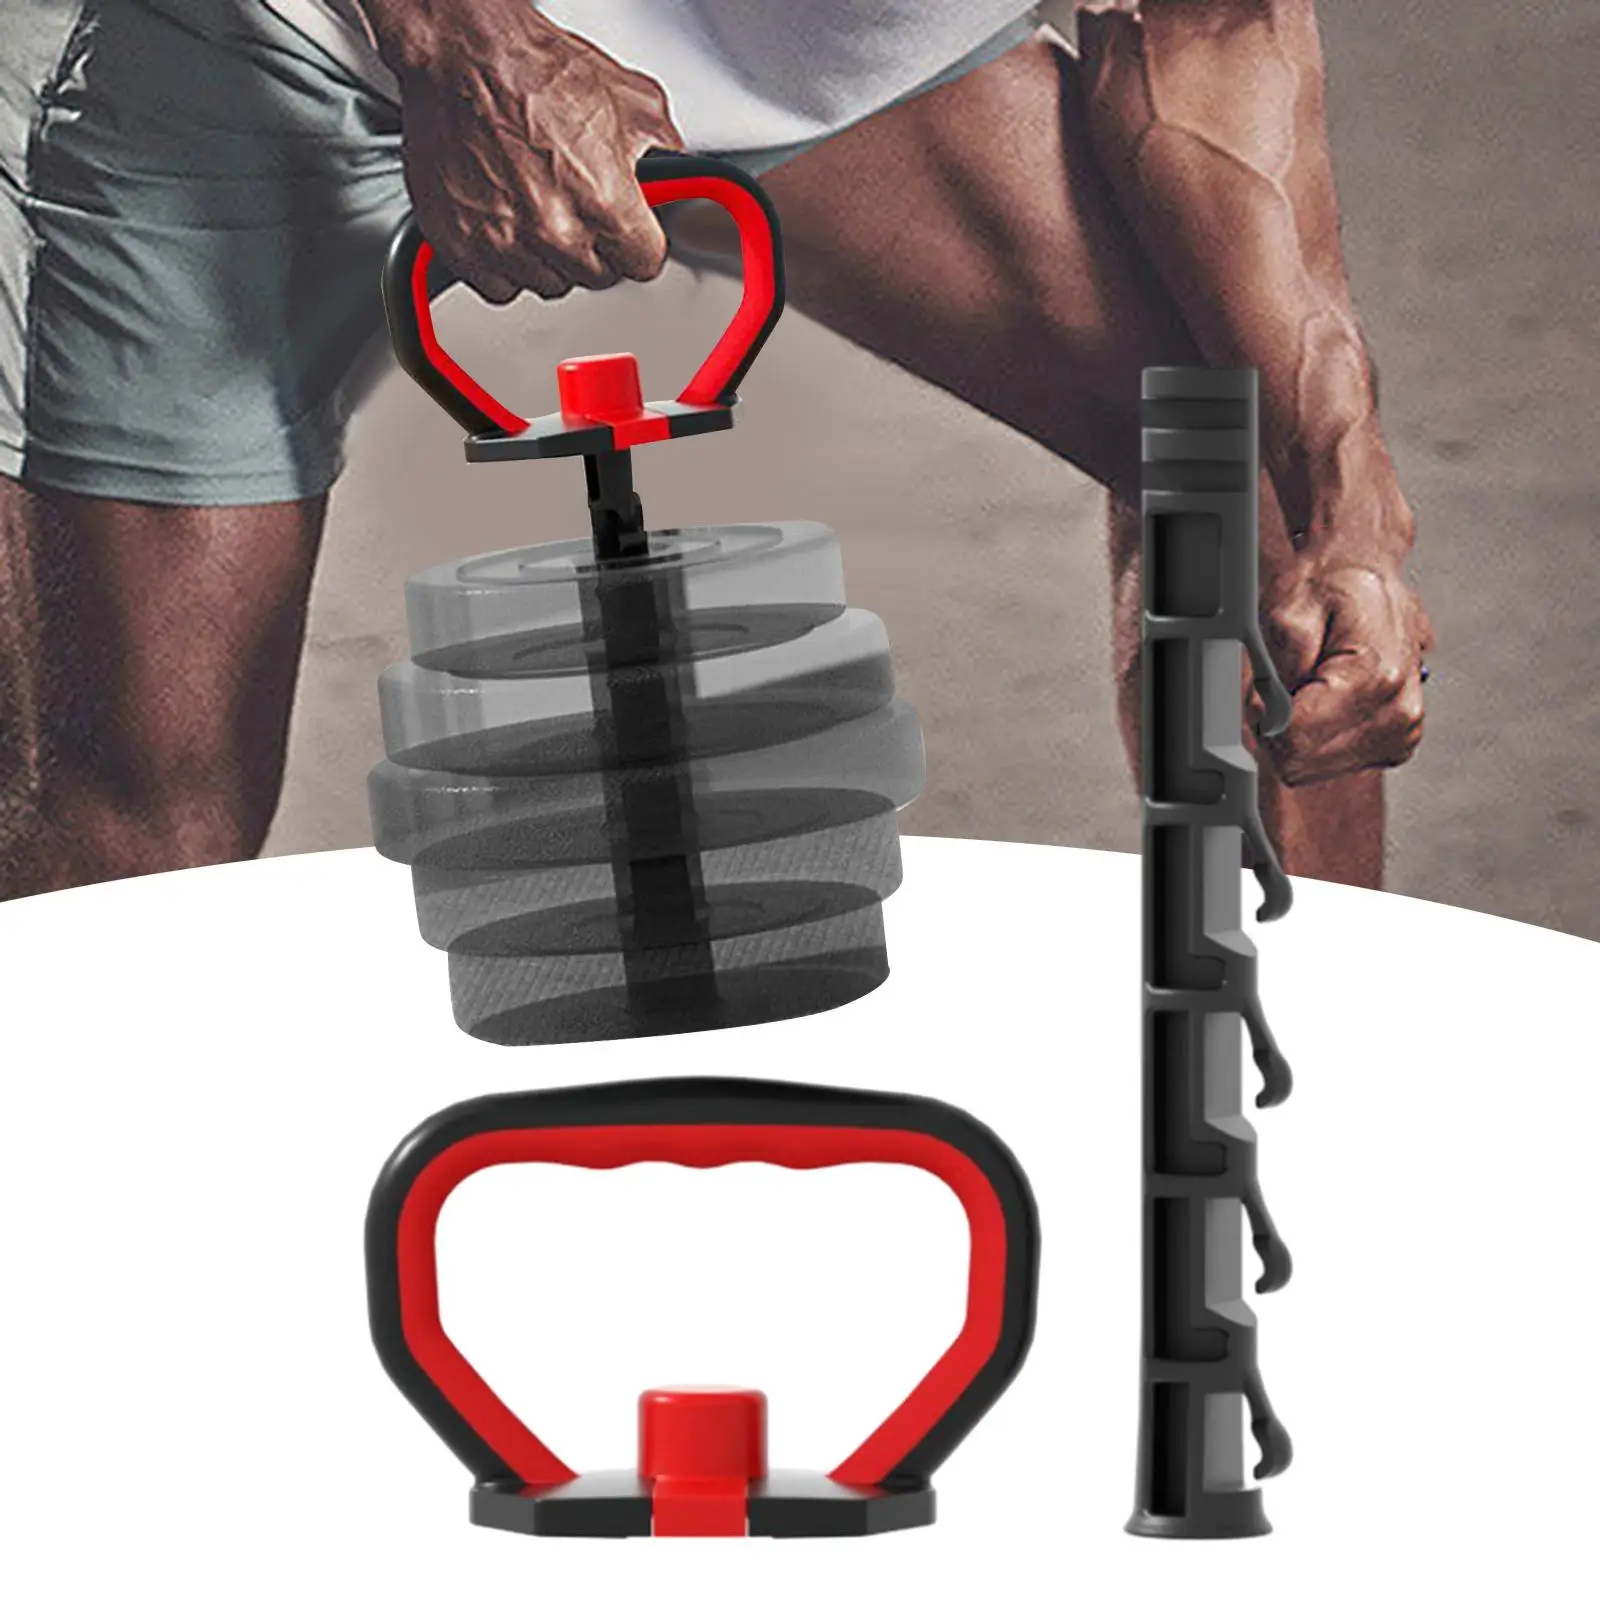 Kettle Bell Grip Handle Adjustable with Base Dumbbell Grip for Plates Home Gym Workout Weightlifting Equipment for Women Men